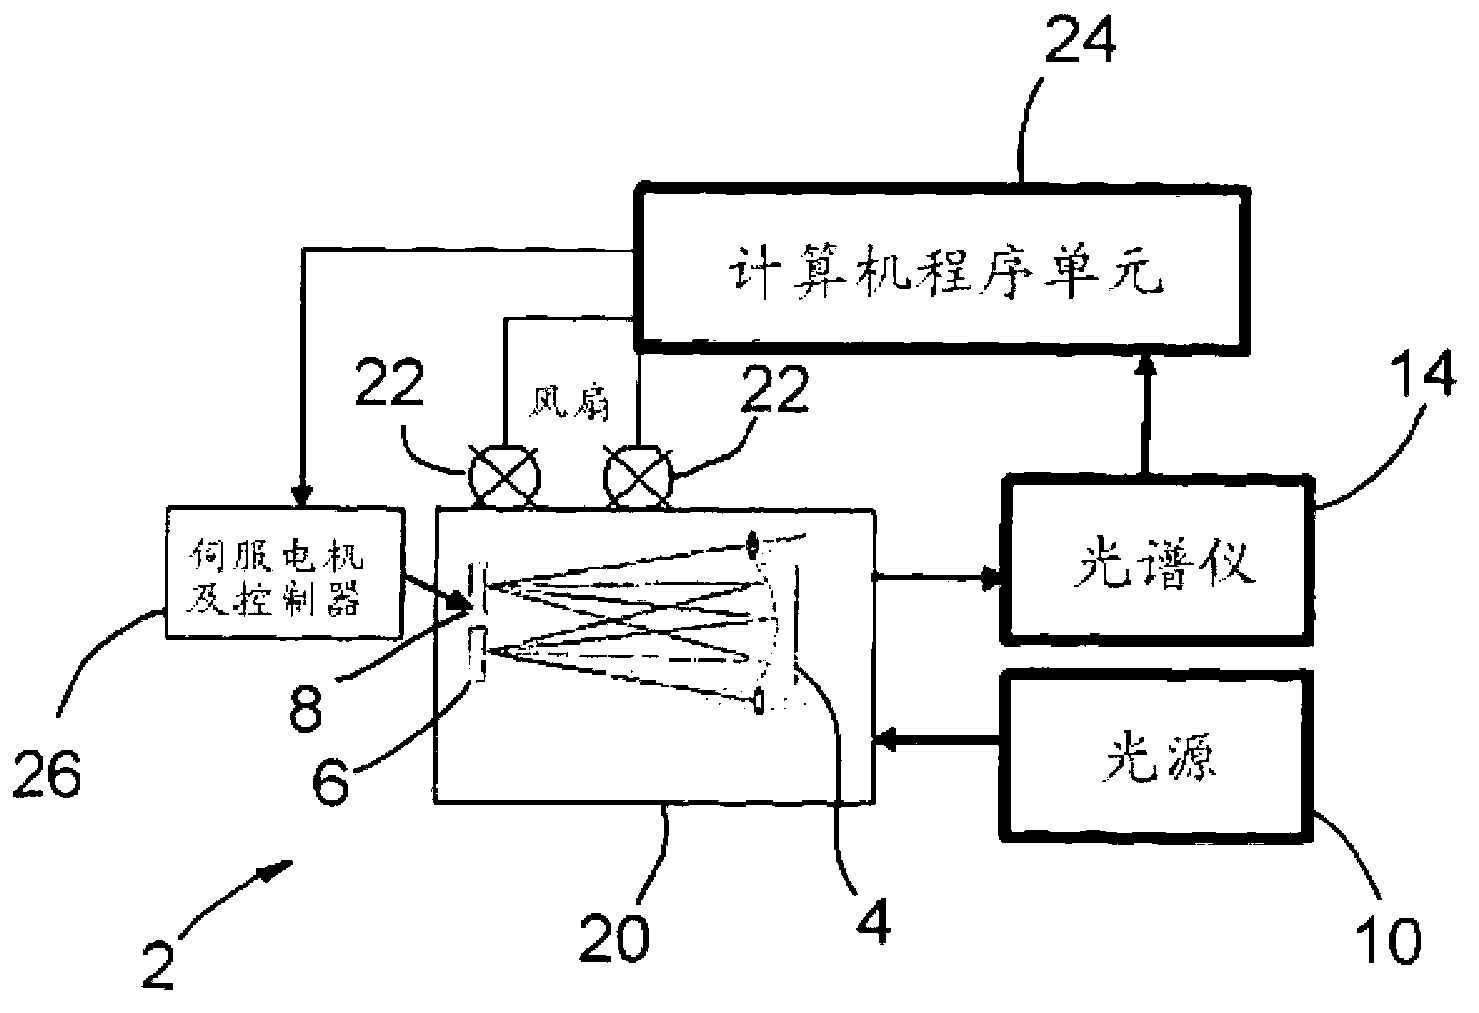 Optical absorption spectroscopy with multi-ass cell with adjustable optical path length